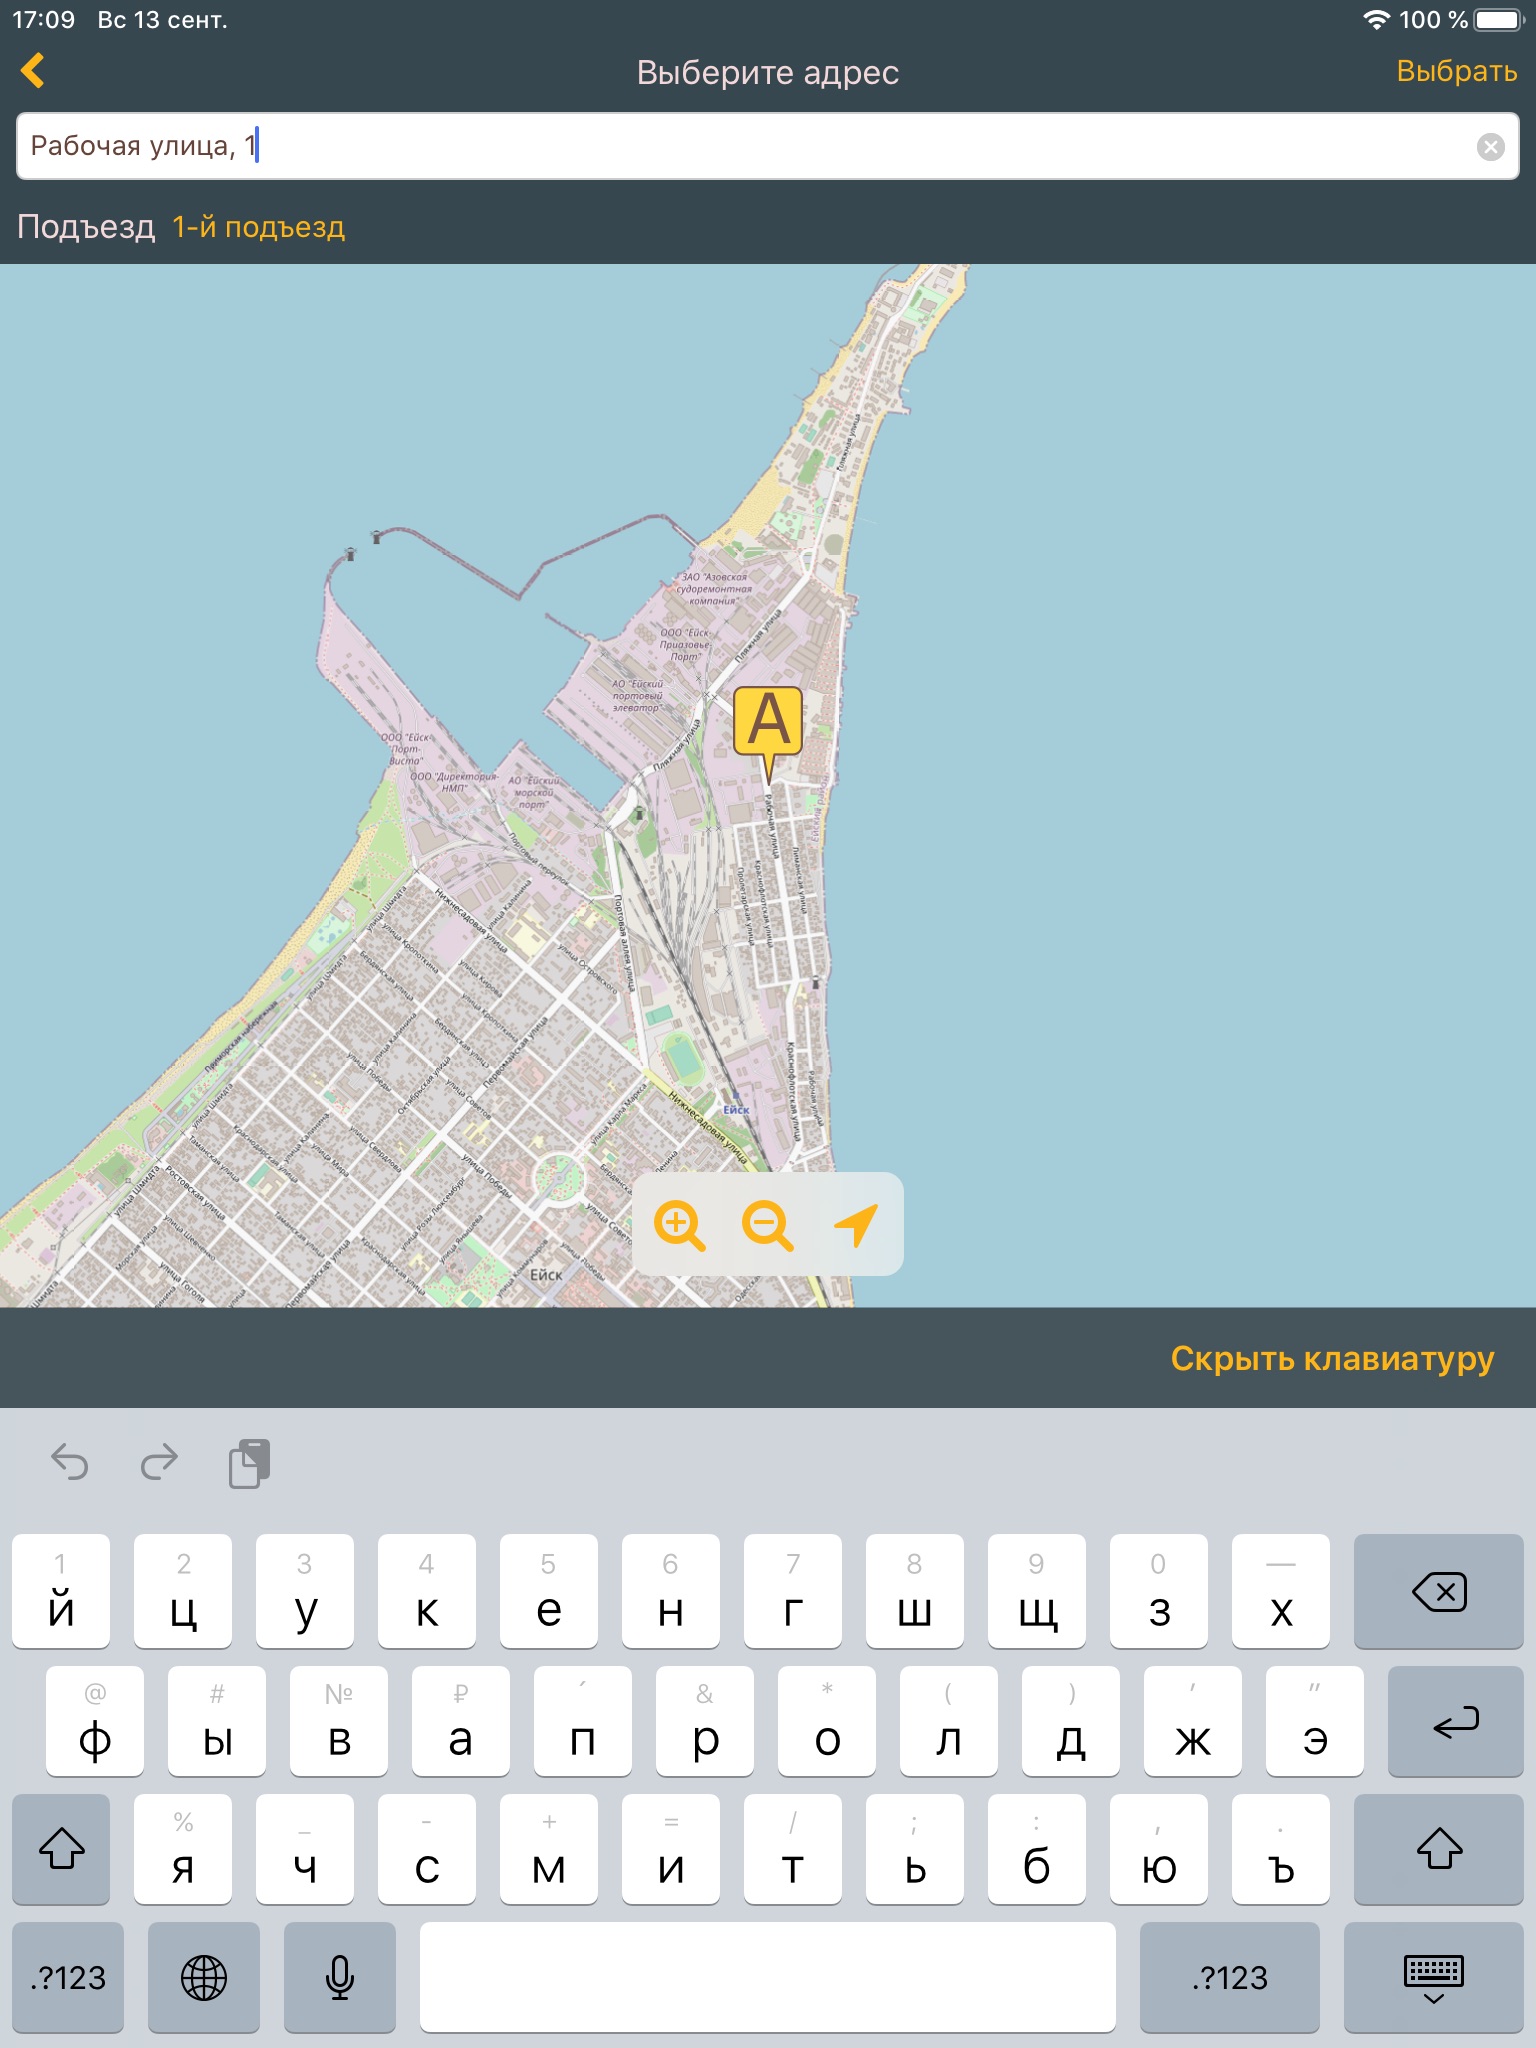 Taxi ordering service "Voyage" screenshot 2